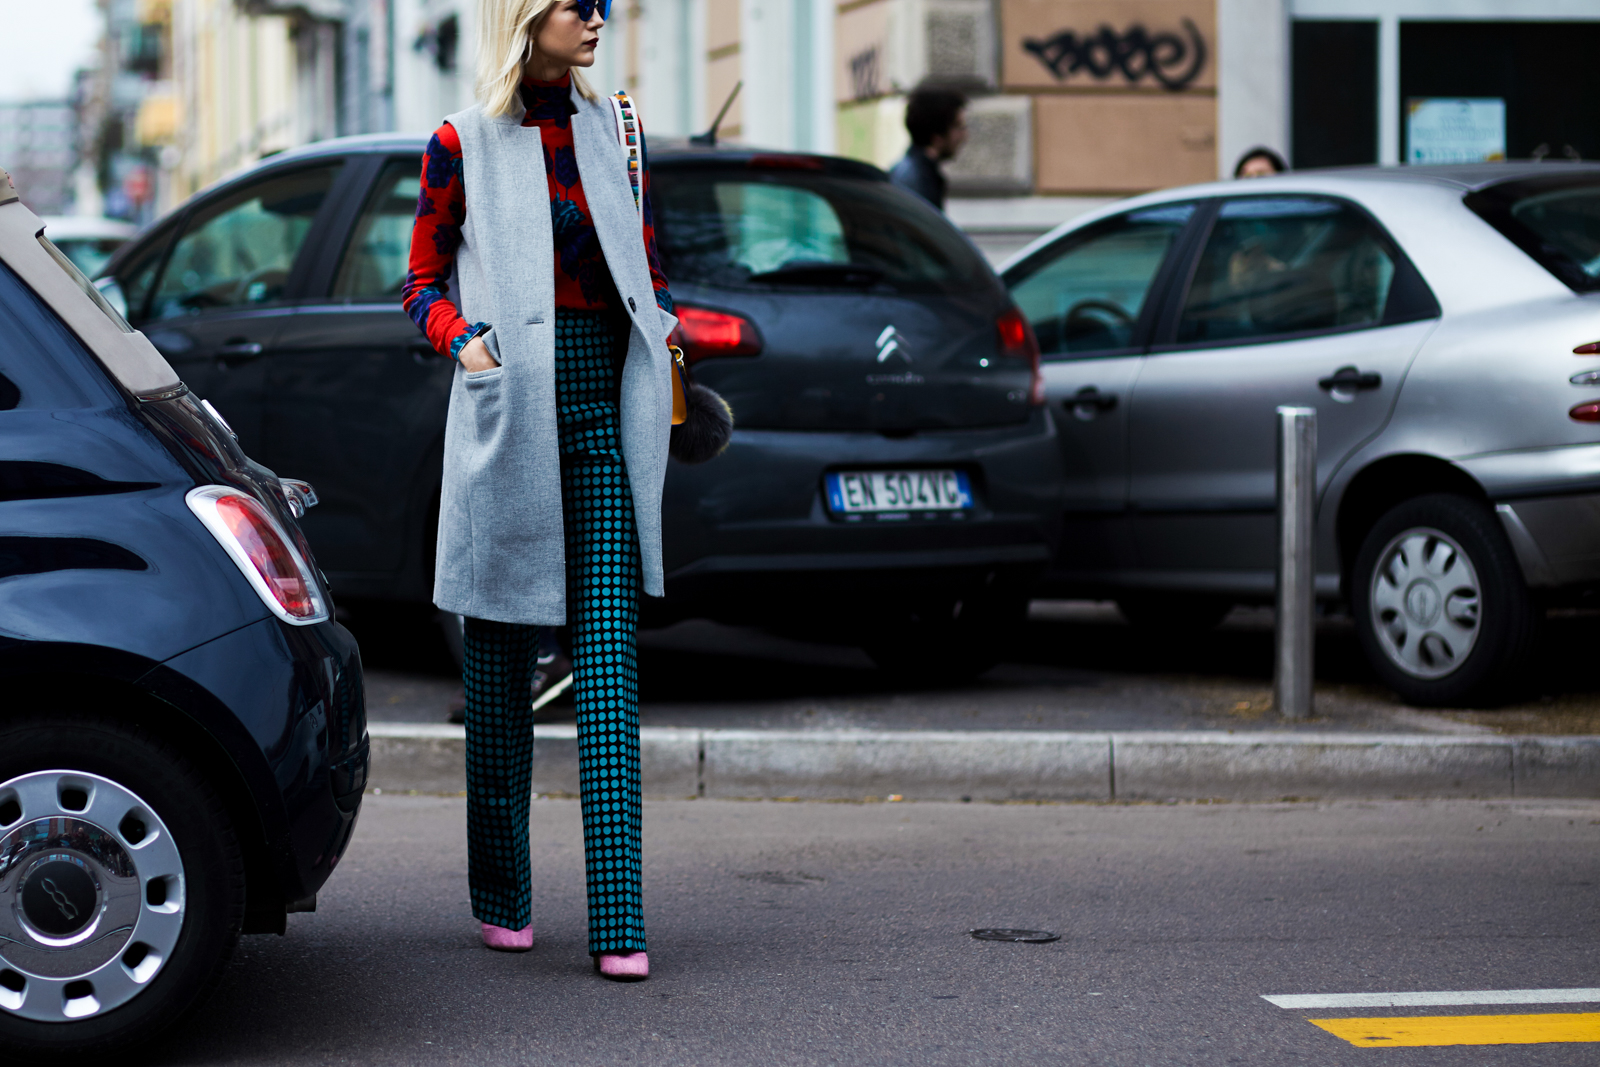 MFW Street Style: Samantha Angelo wearing a grey coat, printed pants, pink Chanel boots and Fendi bag before a fashion show in Milan, Italy